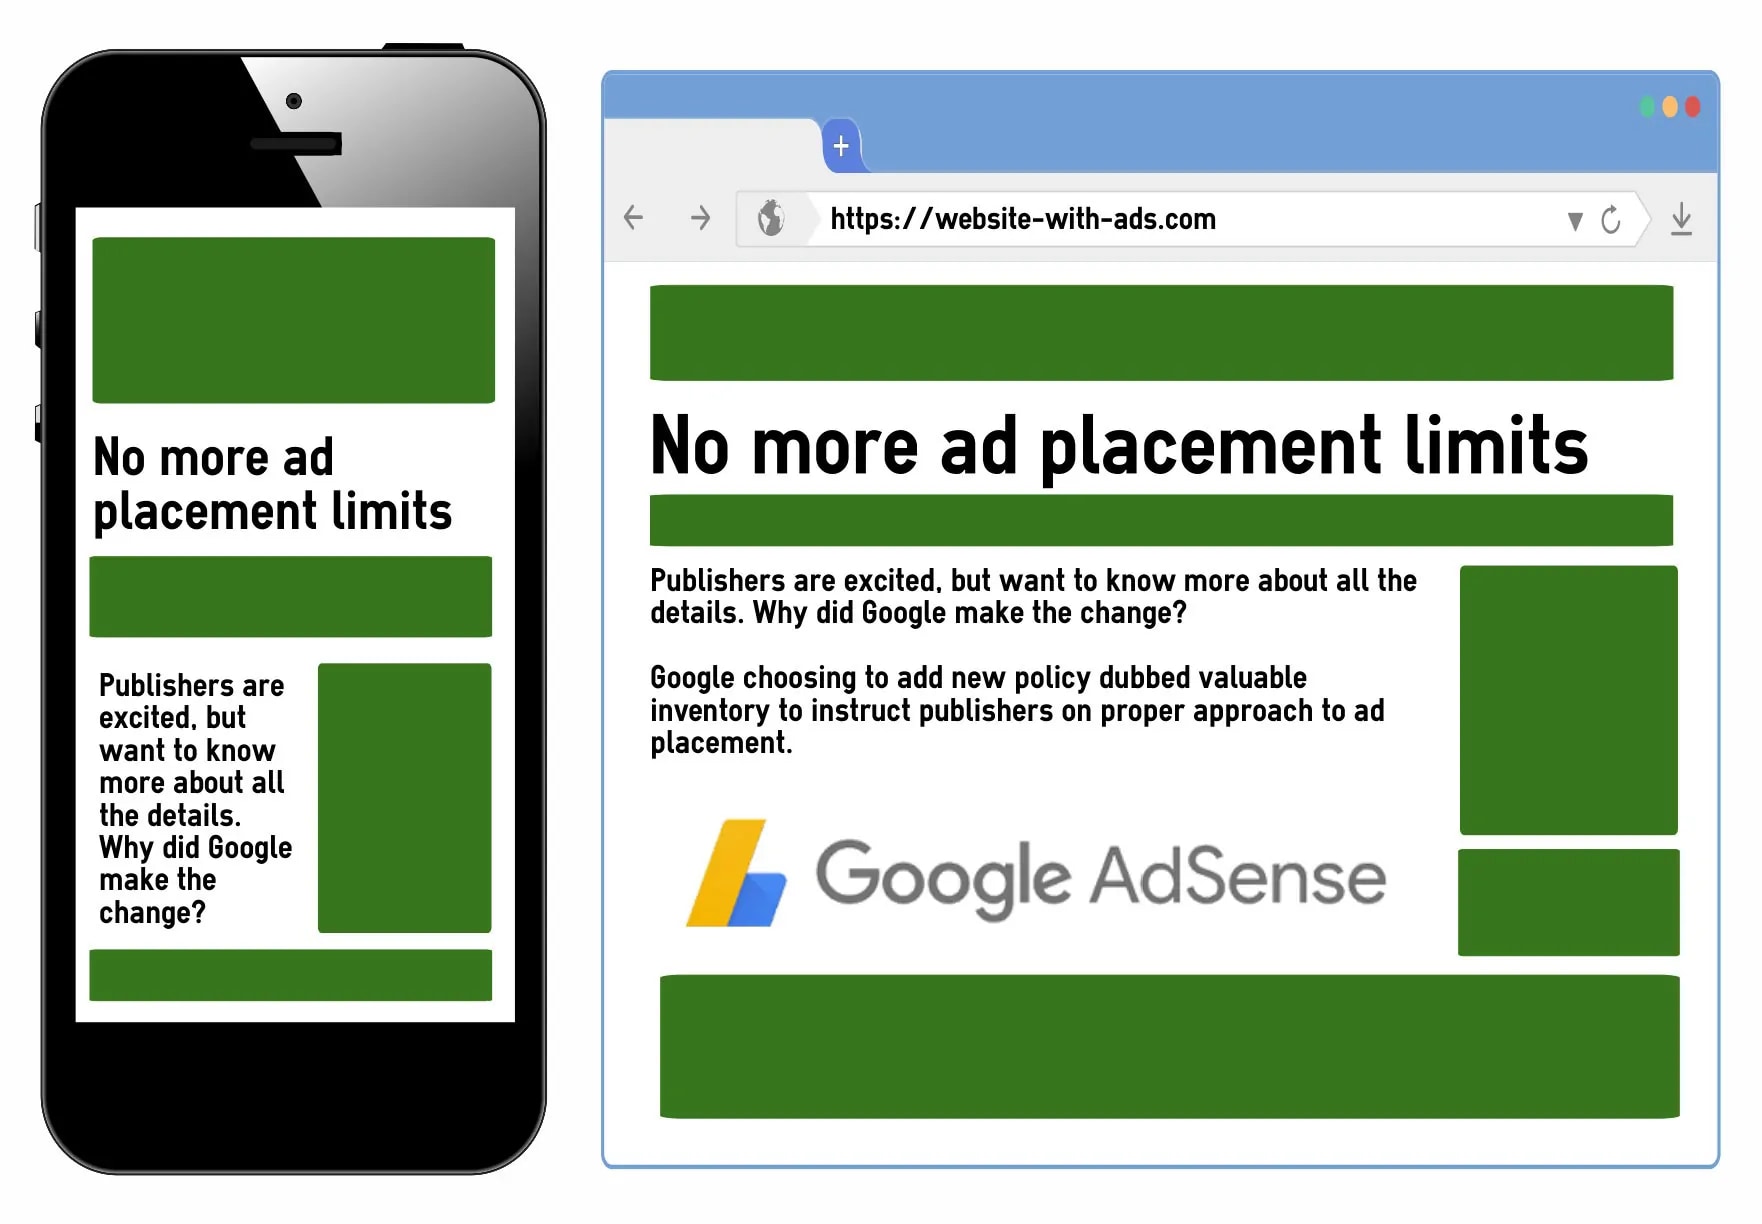 AdSense Removes Ad Limits Per Page,  Adds Valuable Inventory